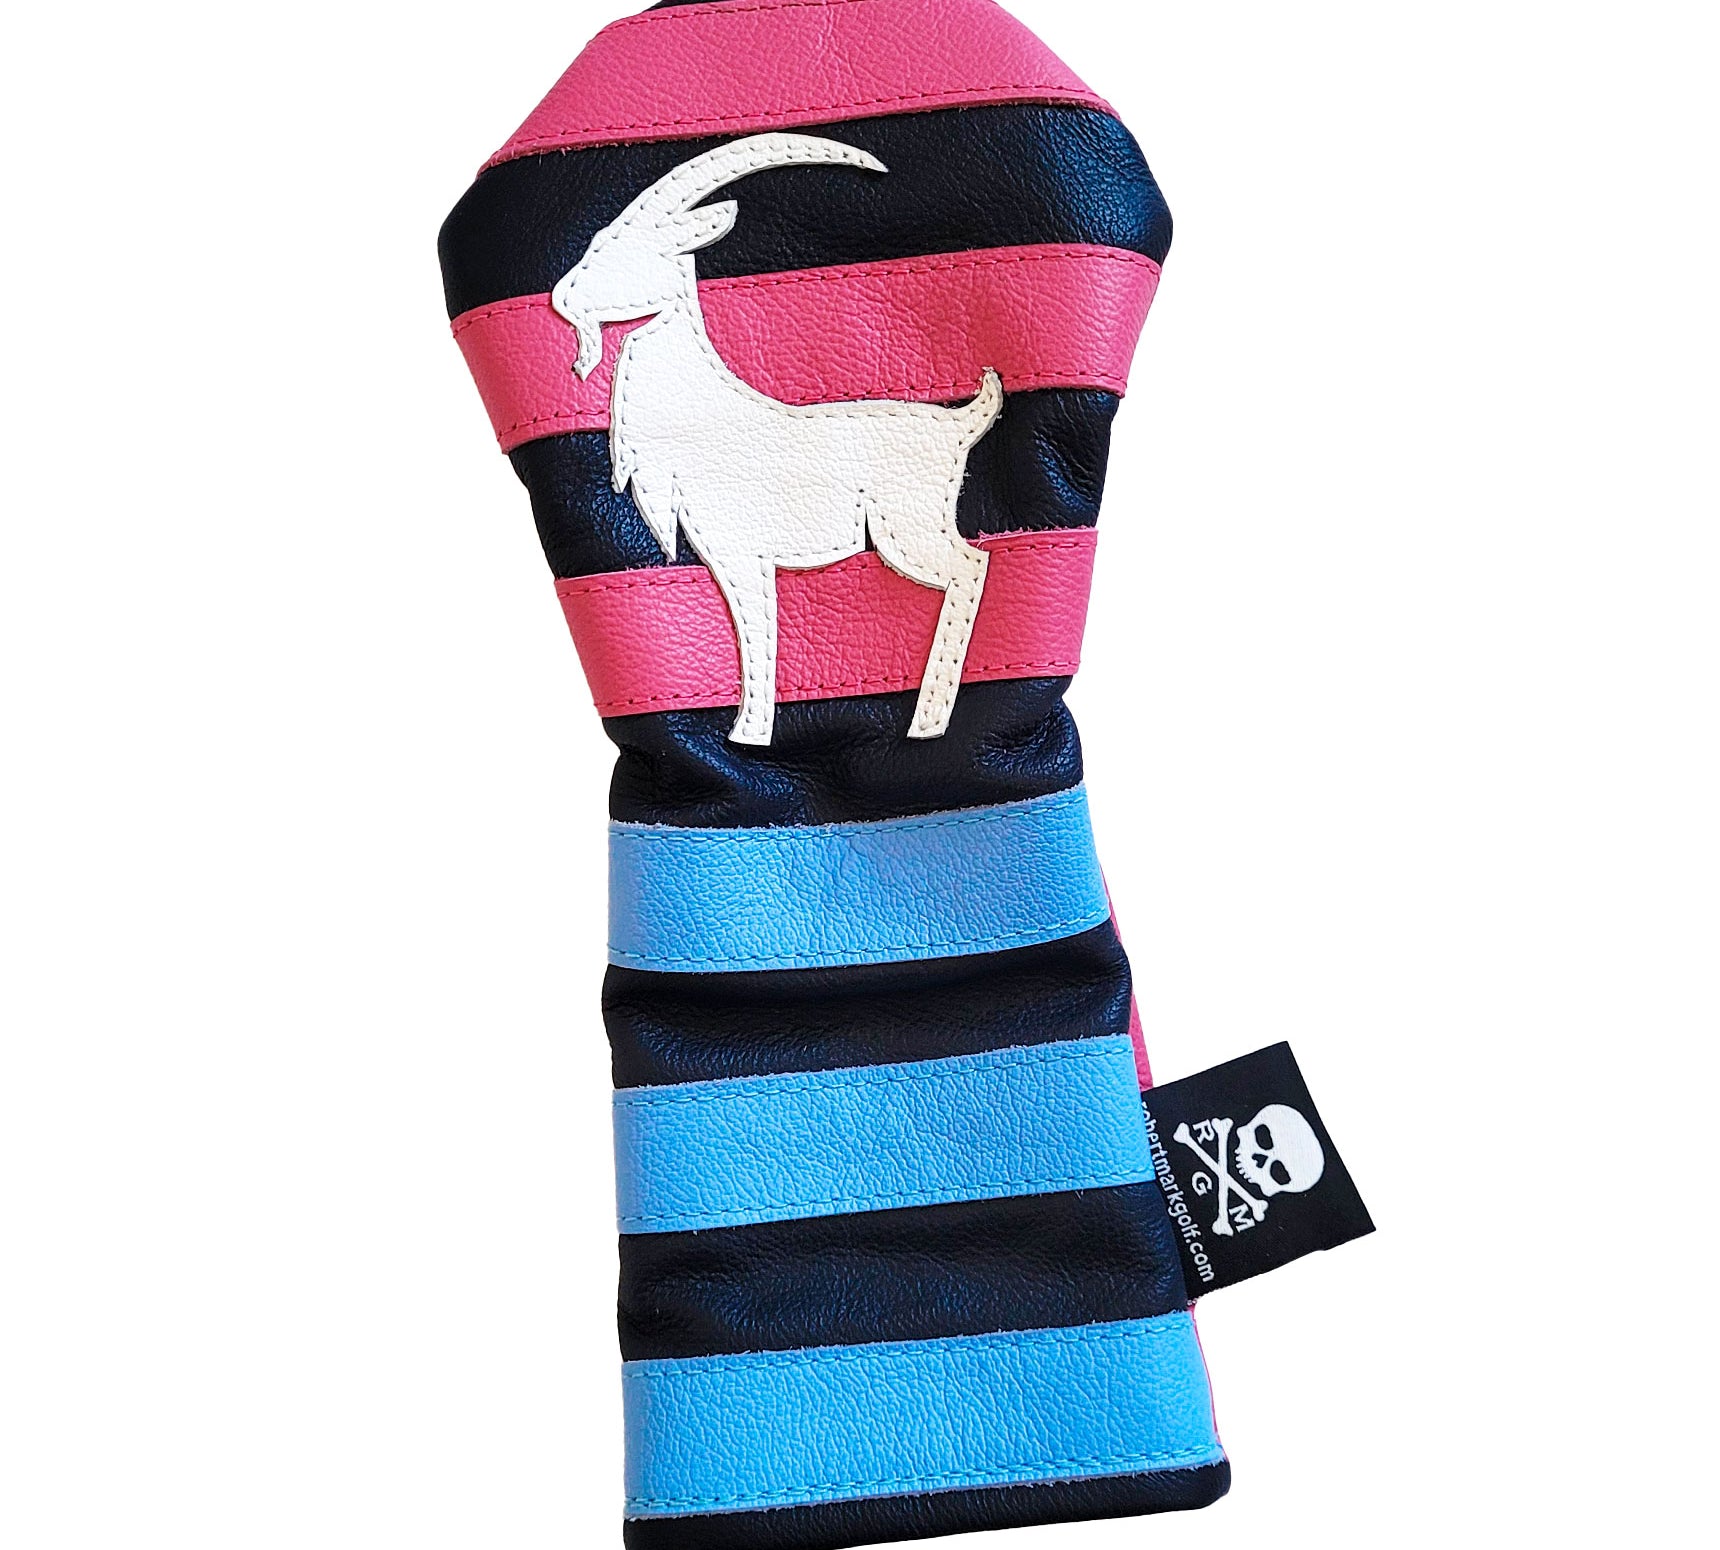 One-Of-A-Kind! The "GOAT" Rugby Stripes Fairway Wood Headcover - Robert Mark Golf